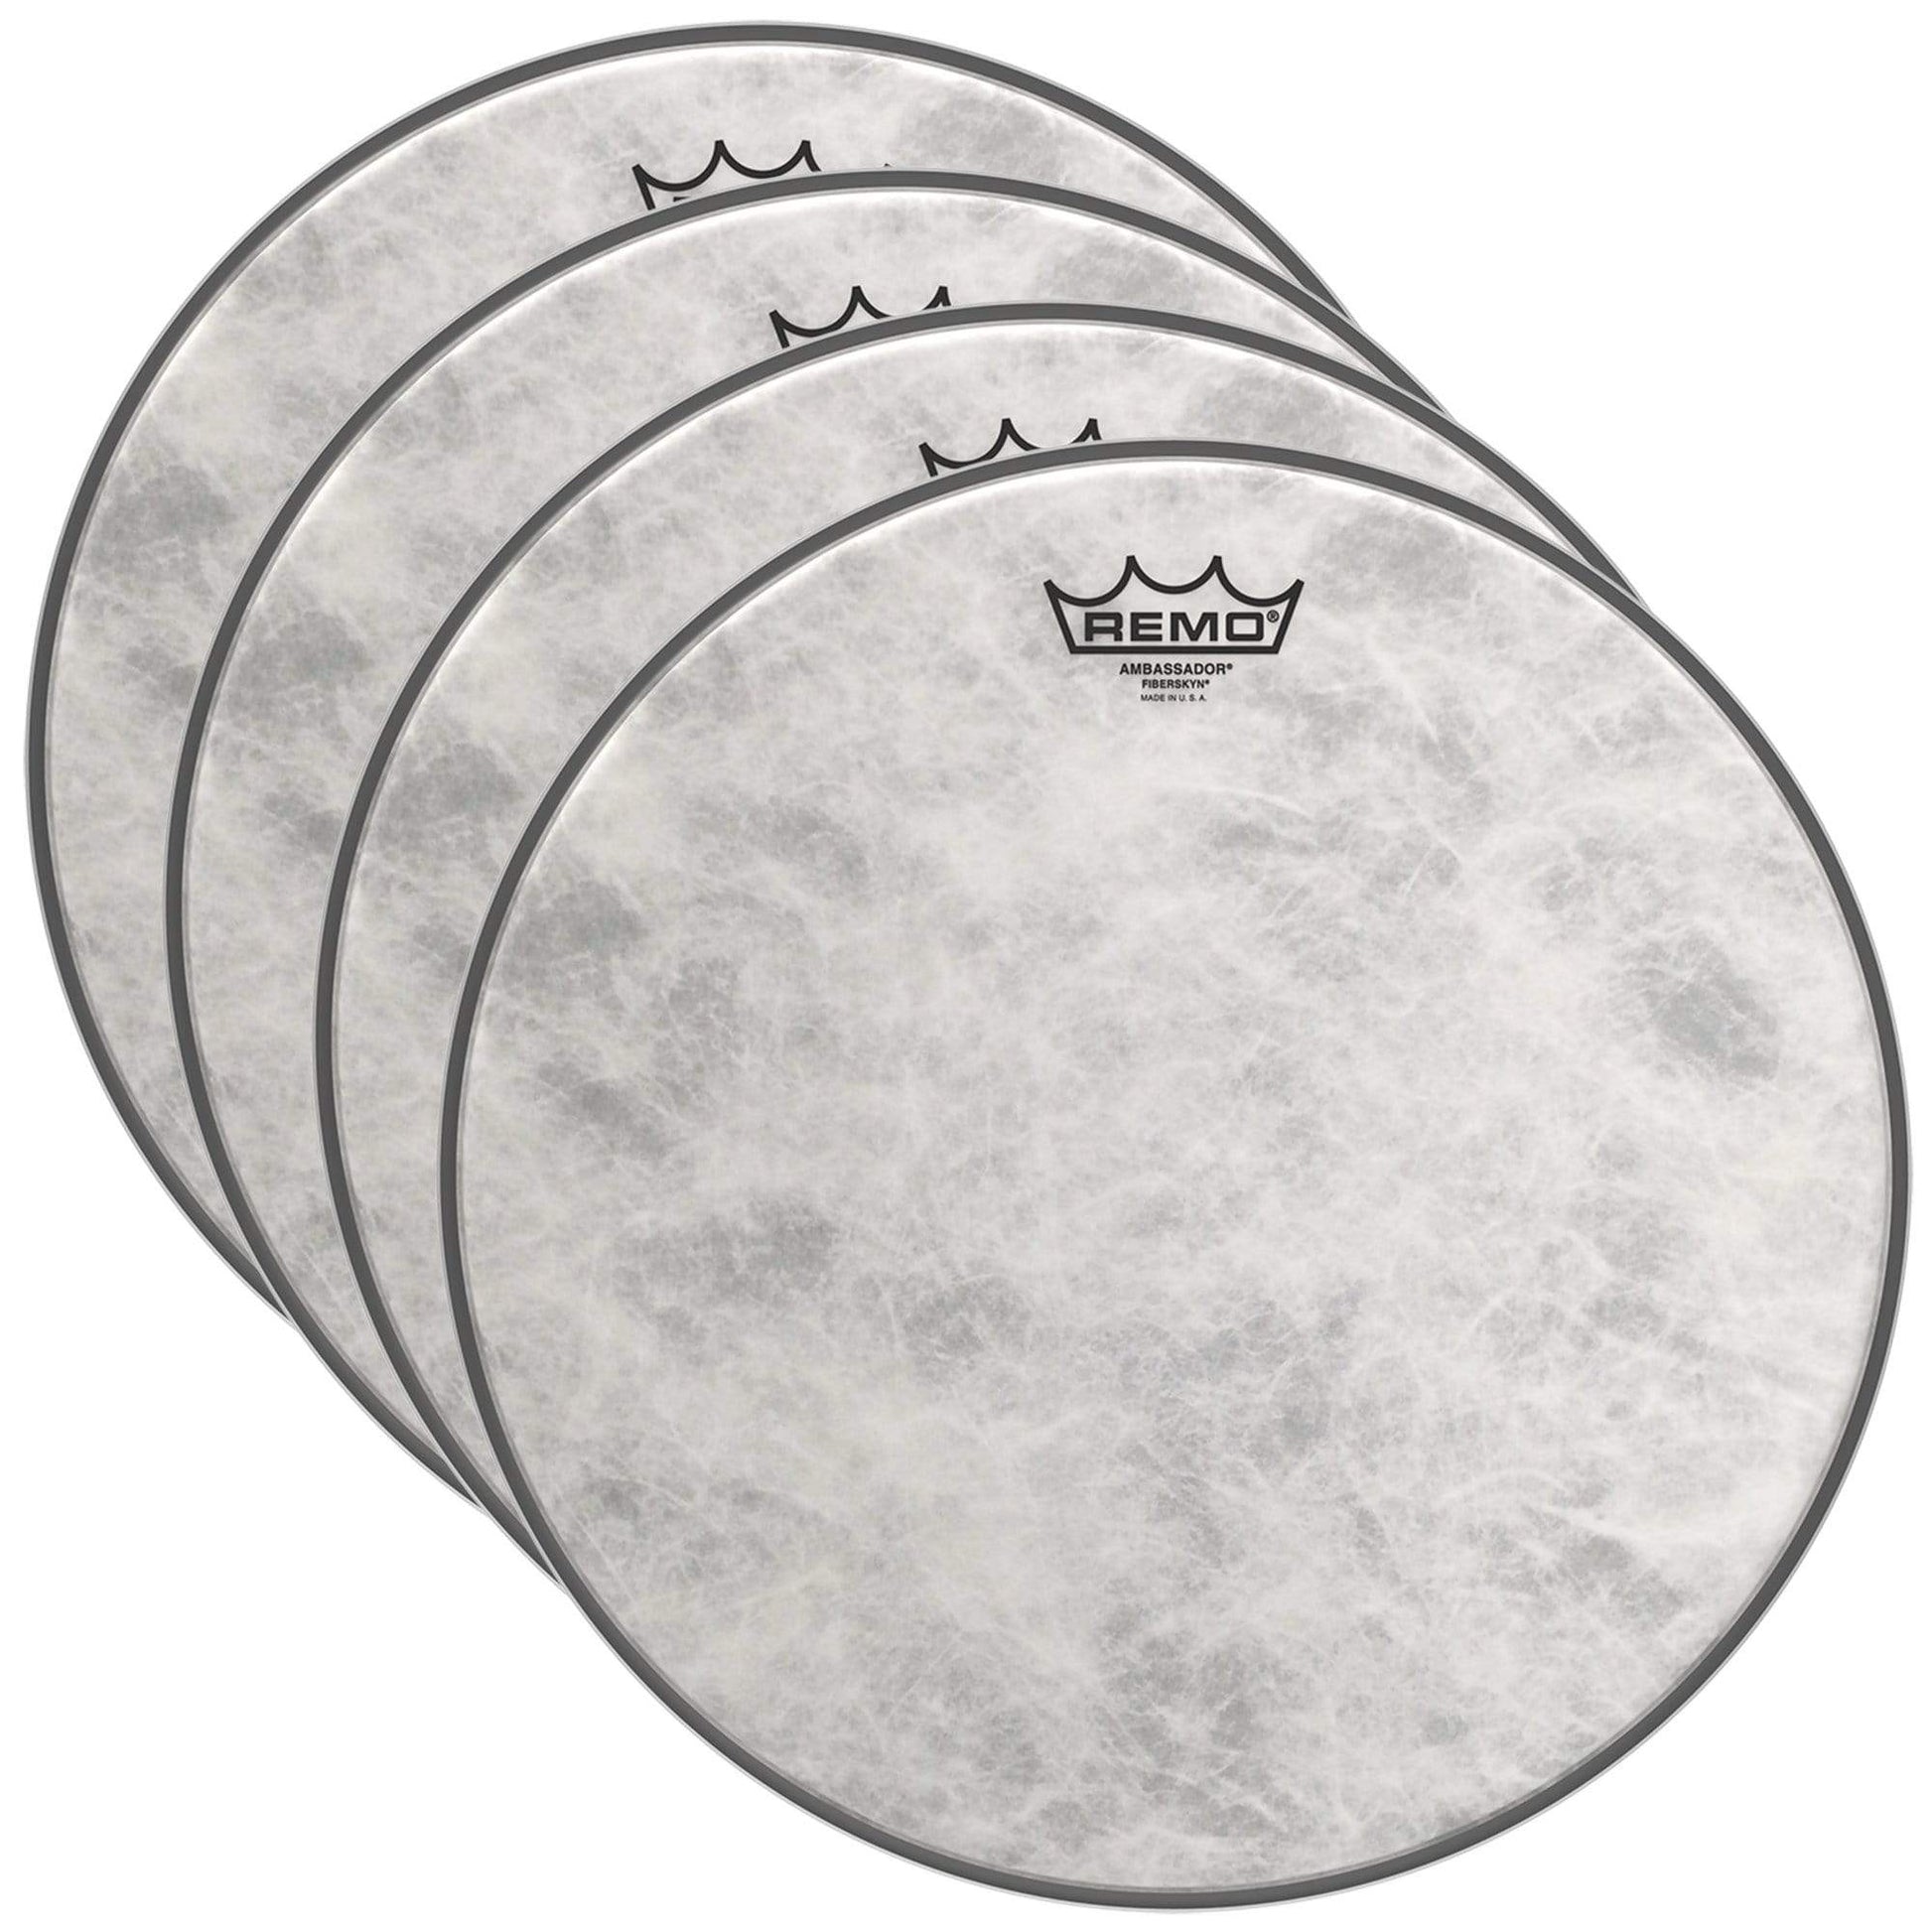 Remo 18" Ambassador Fiberskyn Drumhead (4 Pack Bundle) Drums and Percussion / Parts and Accessories / Heads